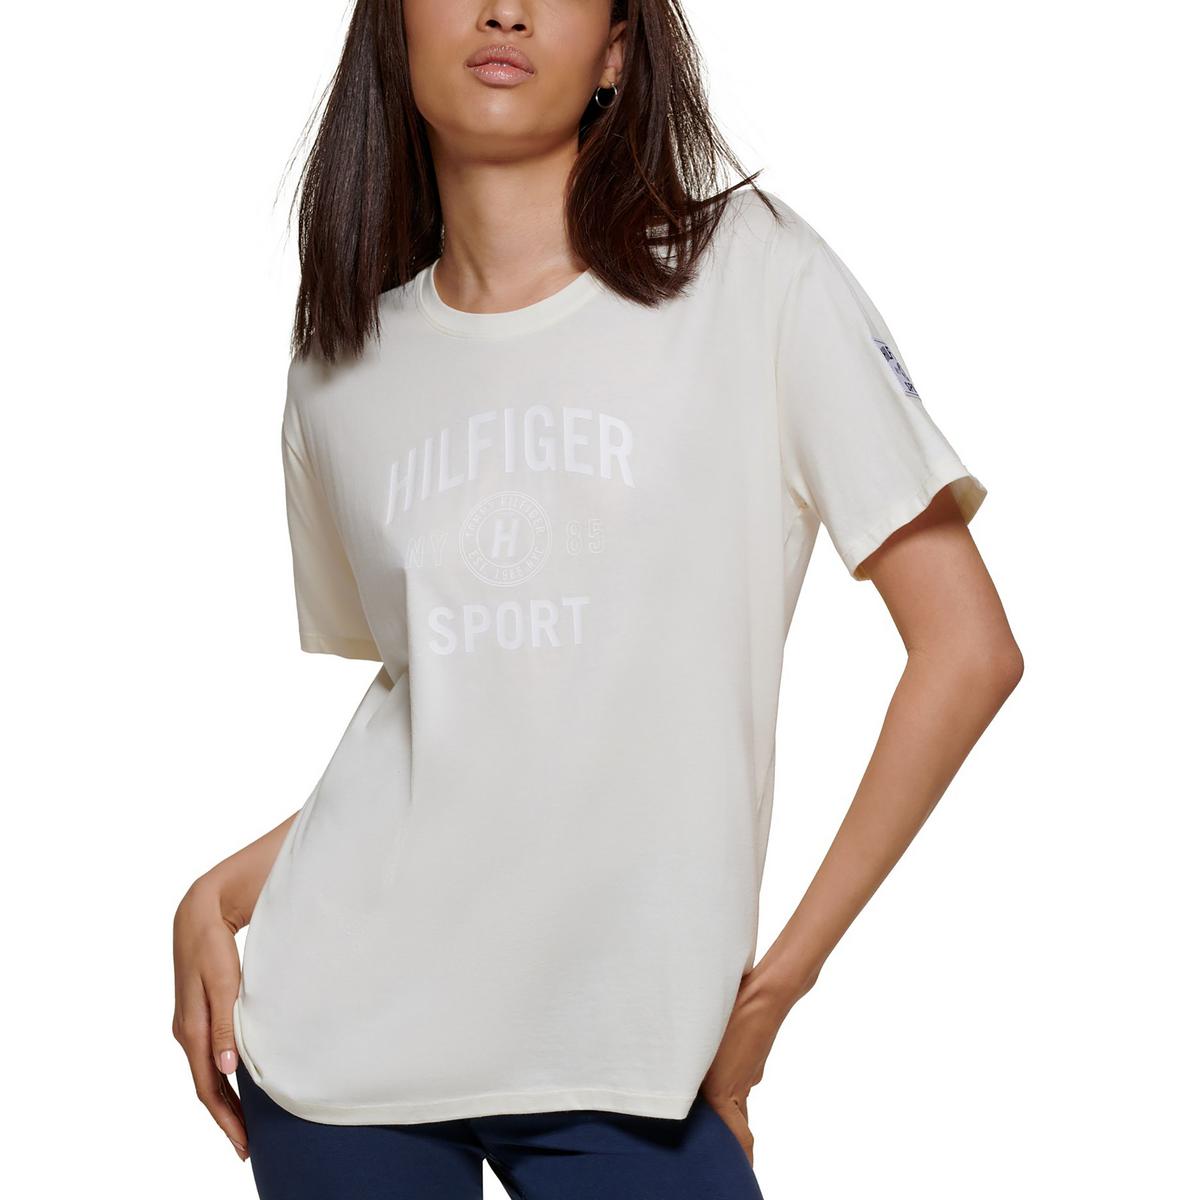 Tommy Hilfiger Sport Womens Fitness Workout Shirts & Tops Athletic